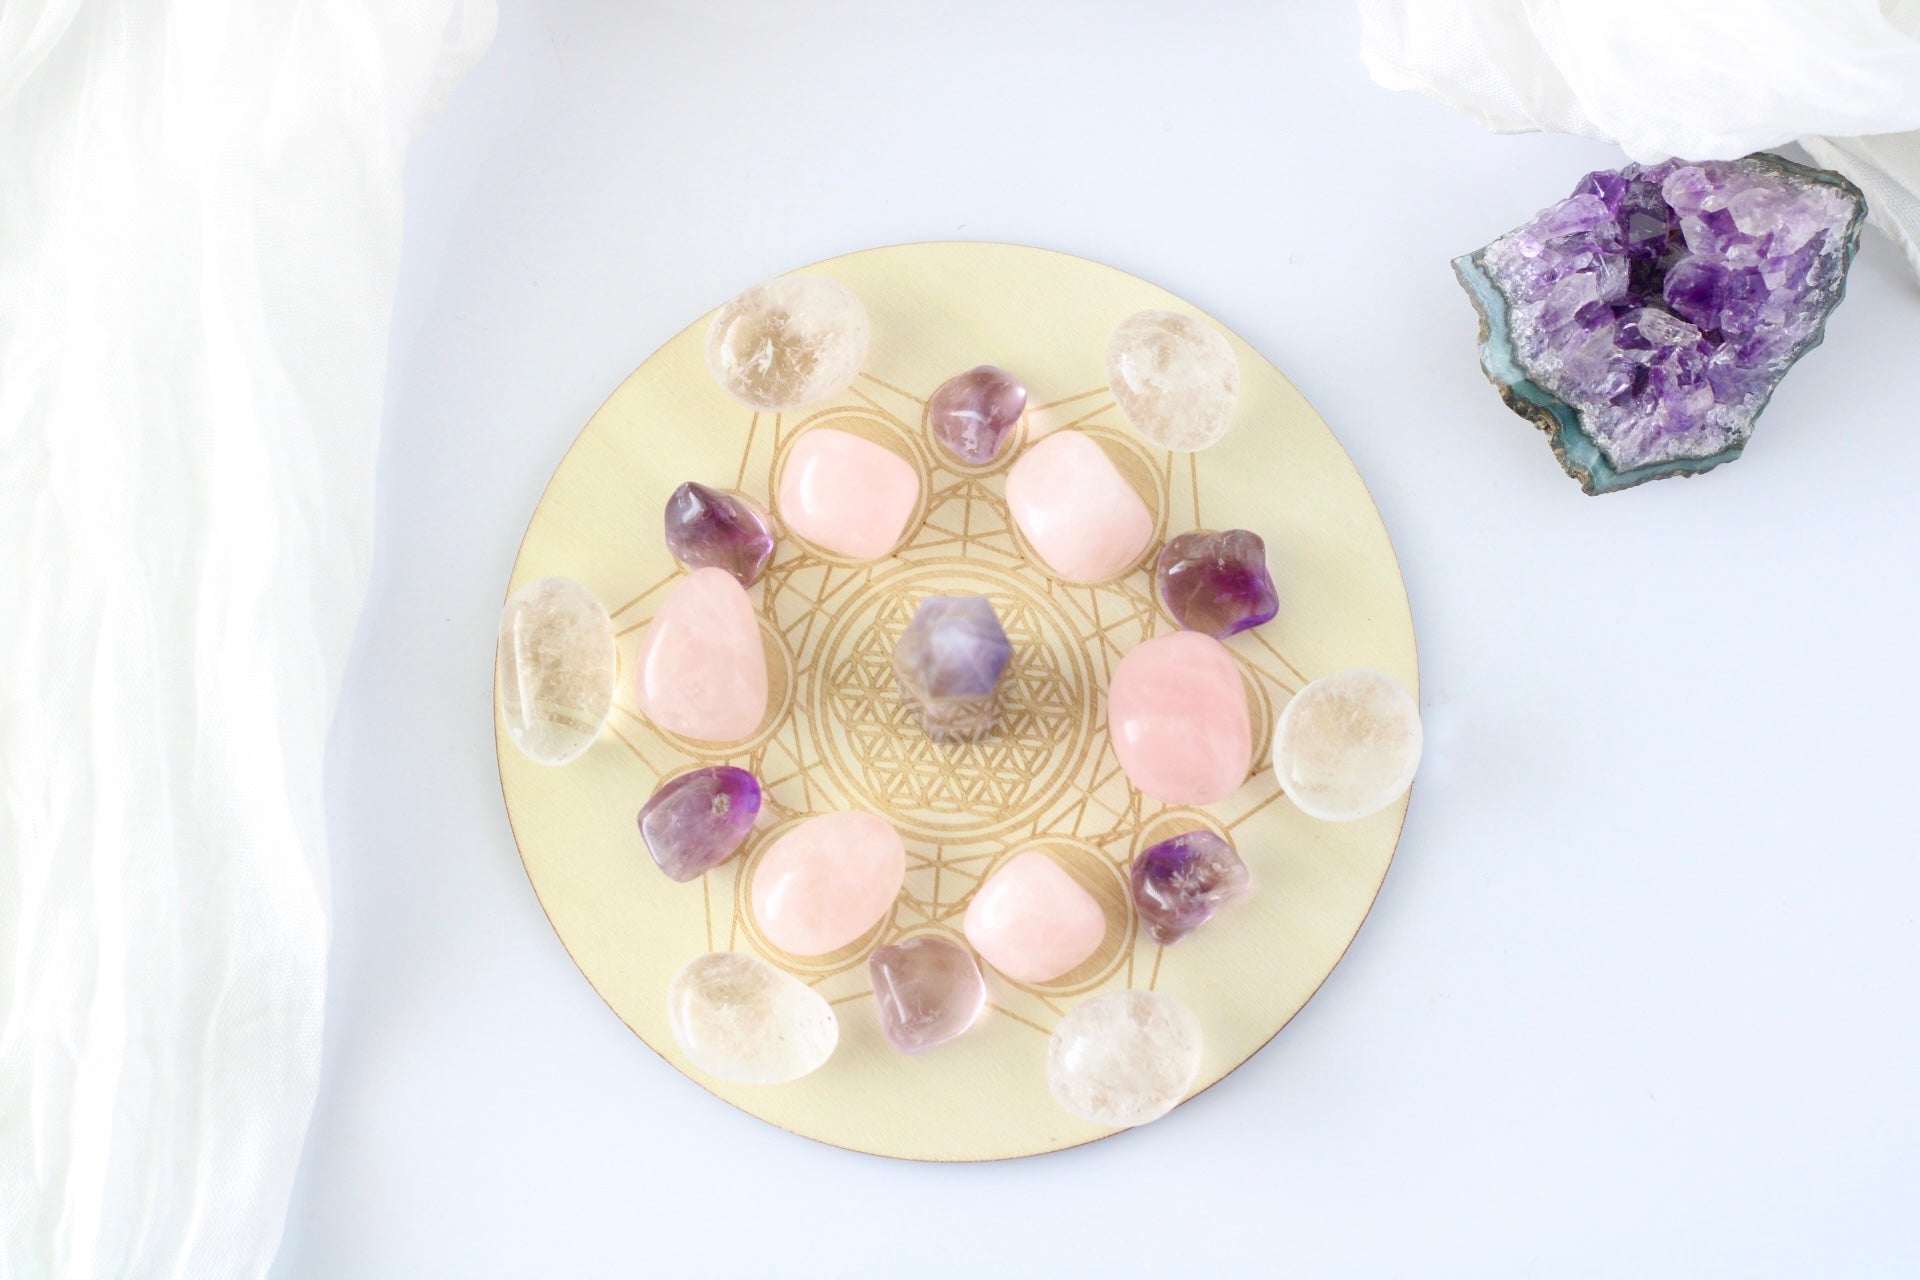 Crystal Grid Board | Metatron's Cube with Flower of Life | Sacred Geometry